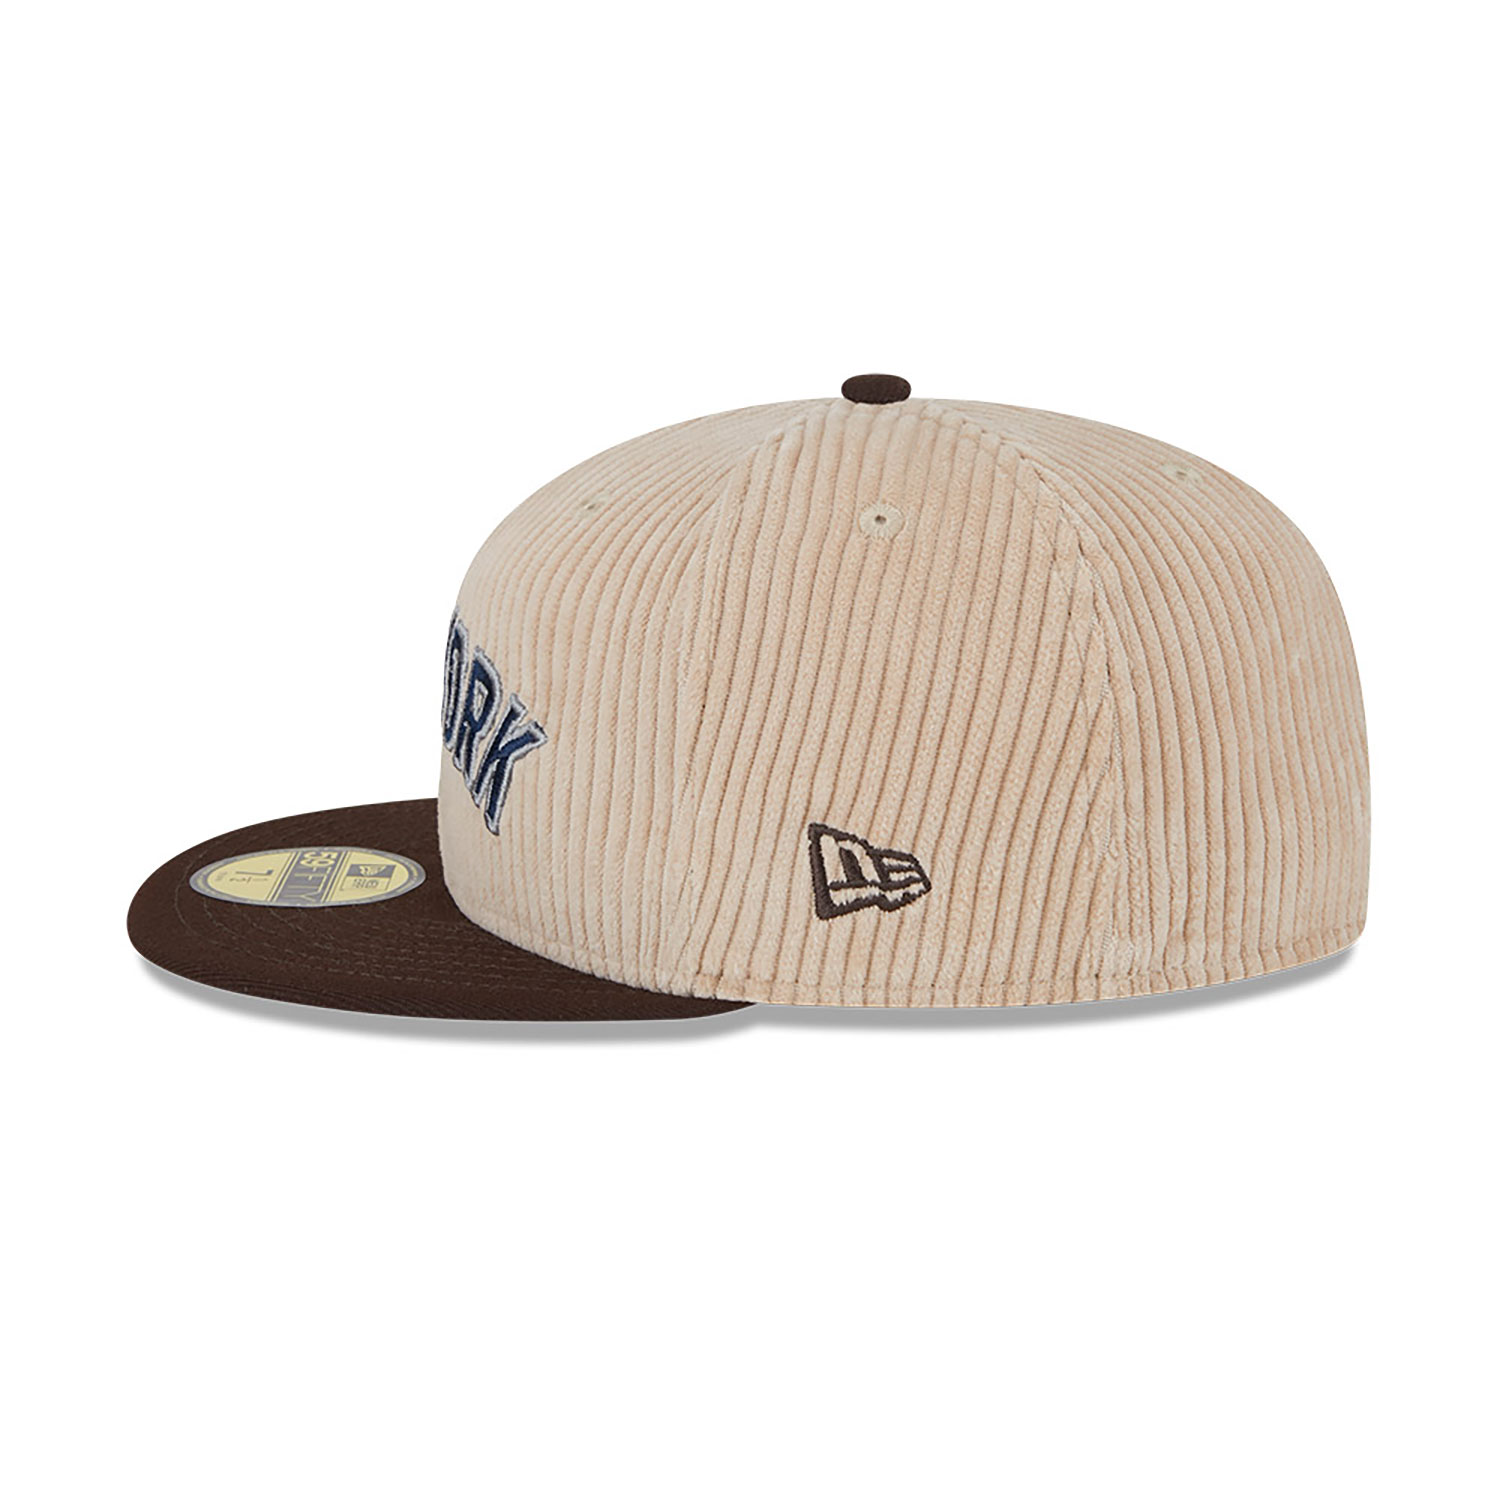 New York Yankees Fall Cord Beige 59FIFTY Fitted Cap